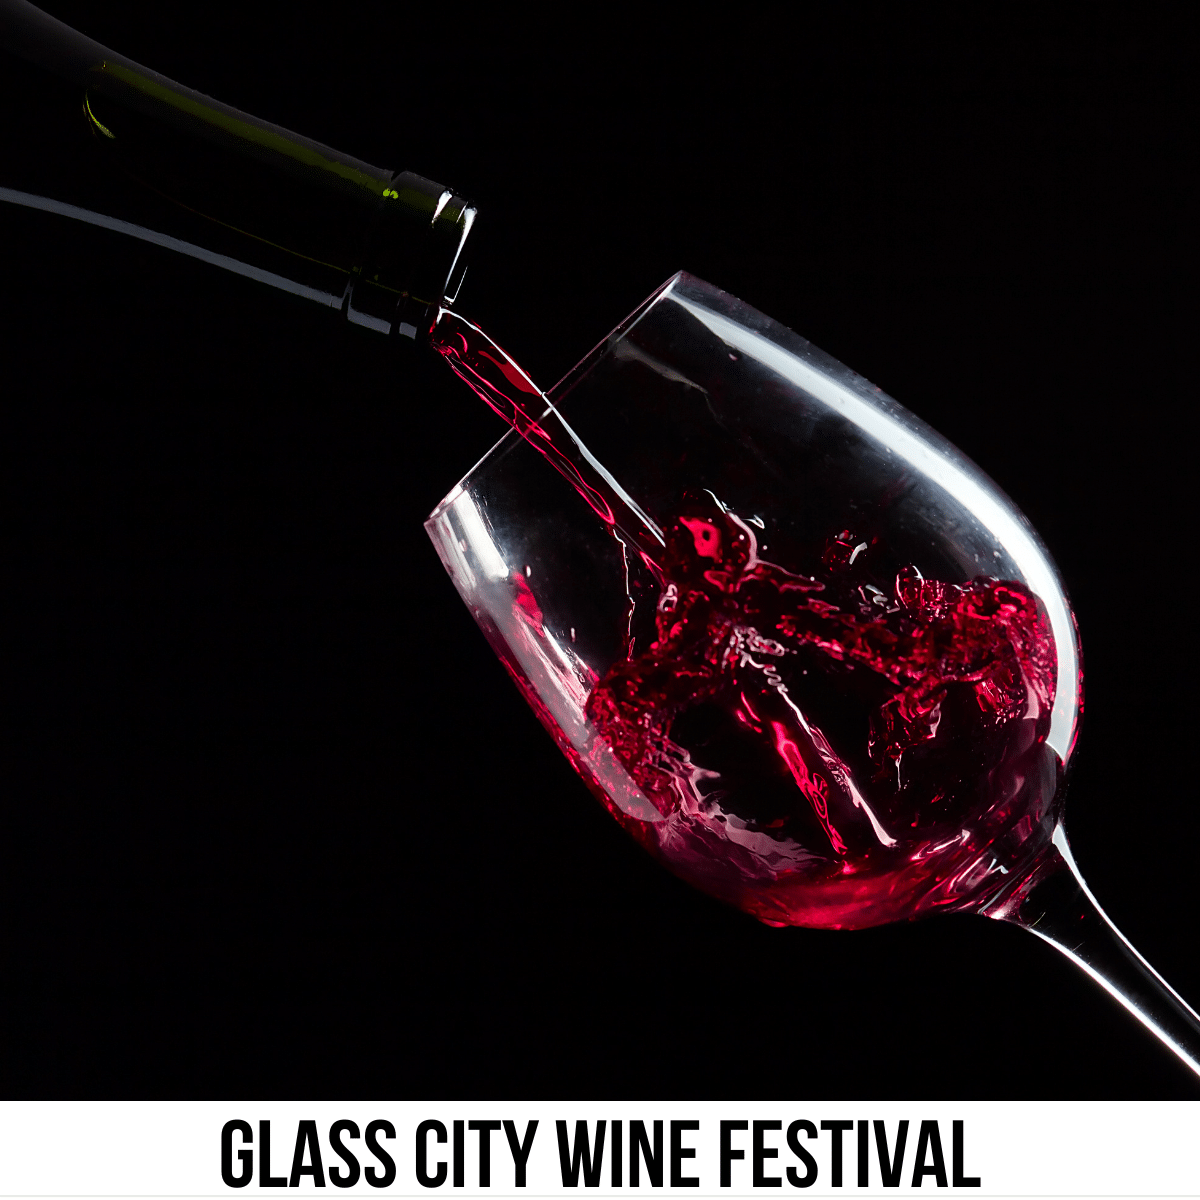 Square image with a photo of a wine glass tipped on its side while a bottle of wine is pouring red wine into the glass, on a black background. A white banner across the bottom says Glass City Wine Festival